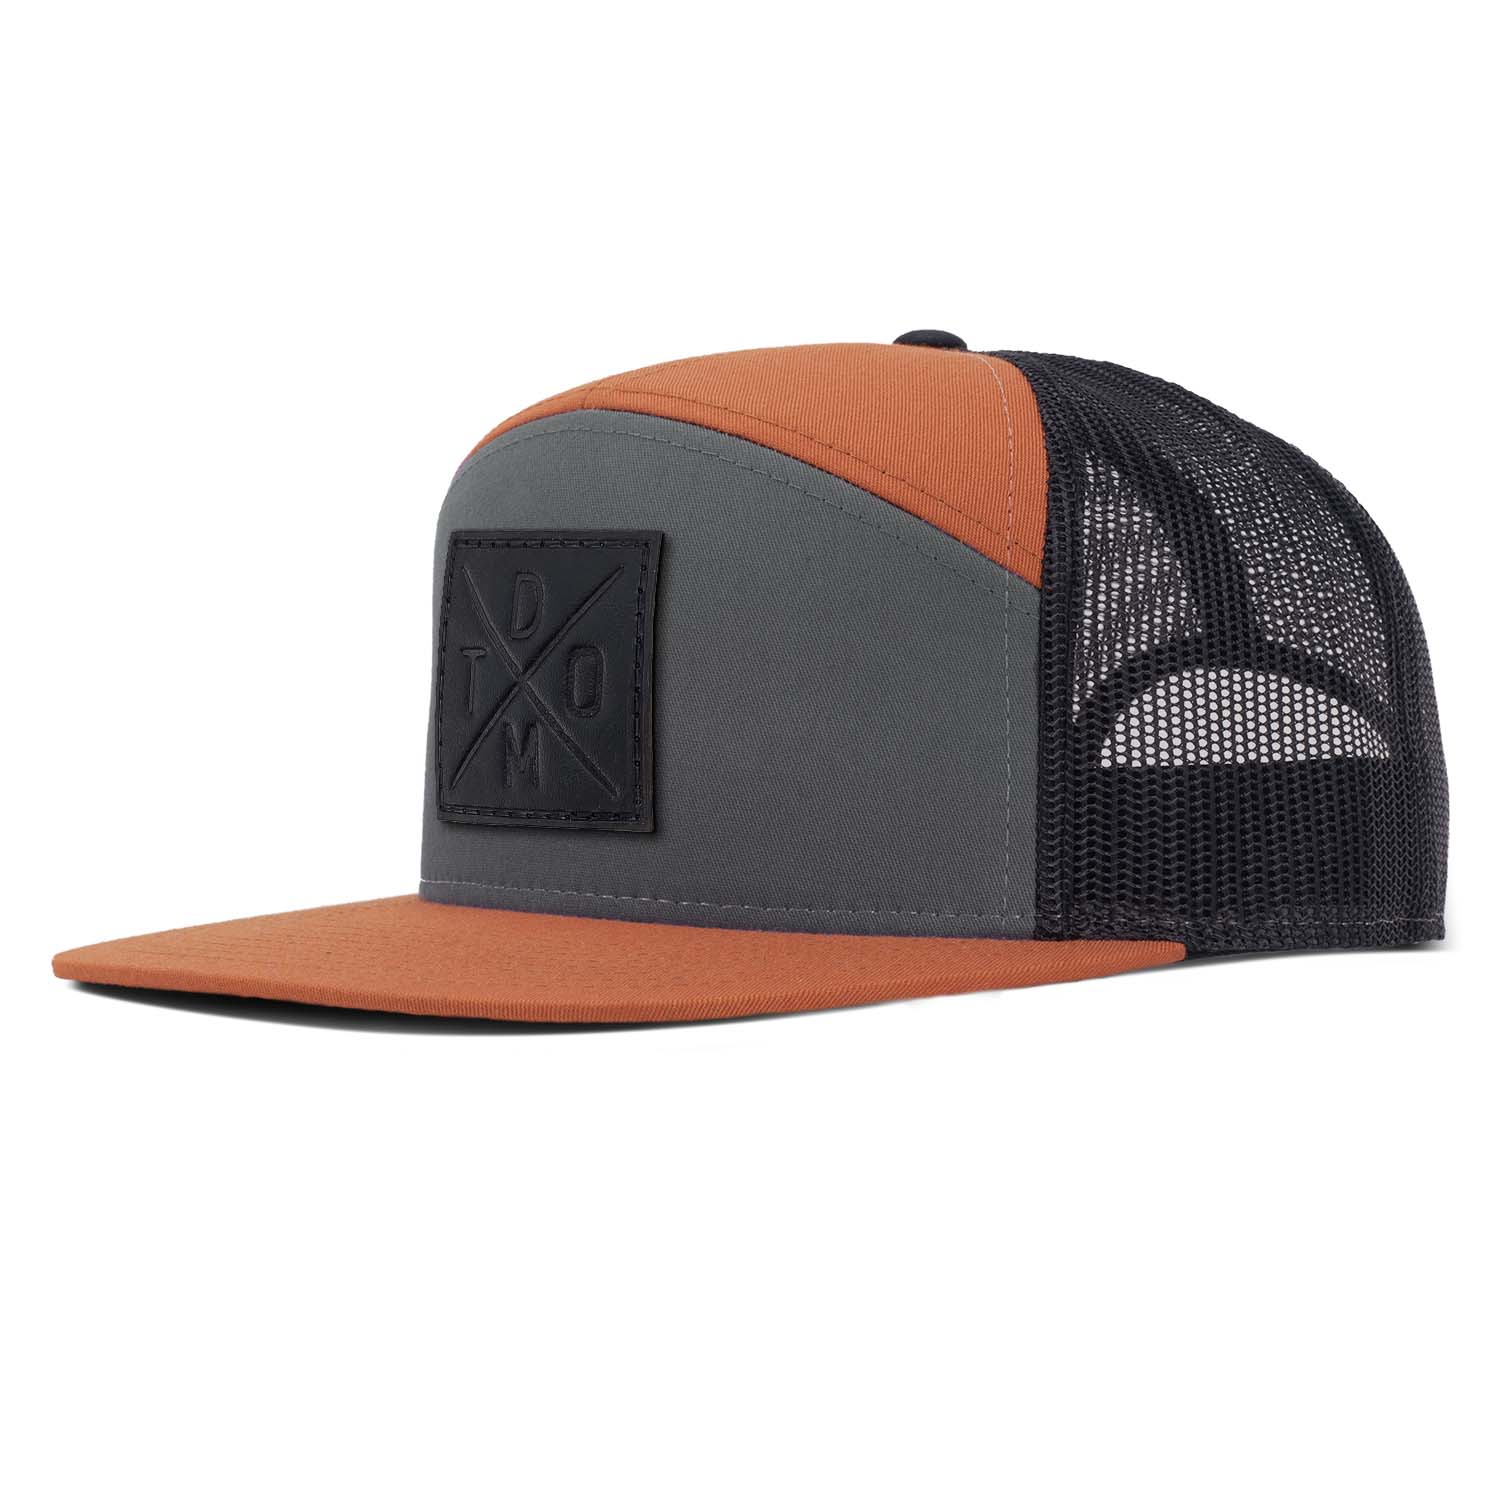 Revolution Mfg charcoal and burnt orange with black mesh 7 panel trucker featuring our black DTOM debossed full grain leather patch.